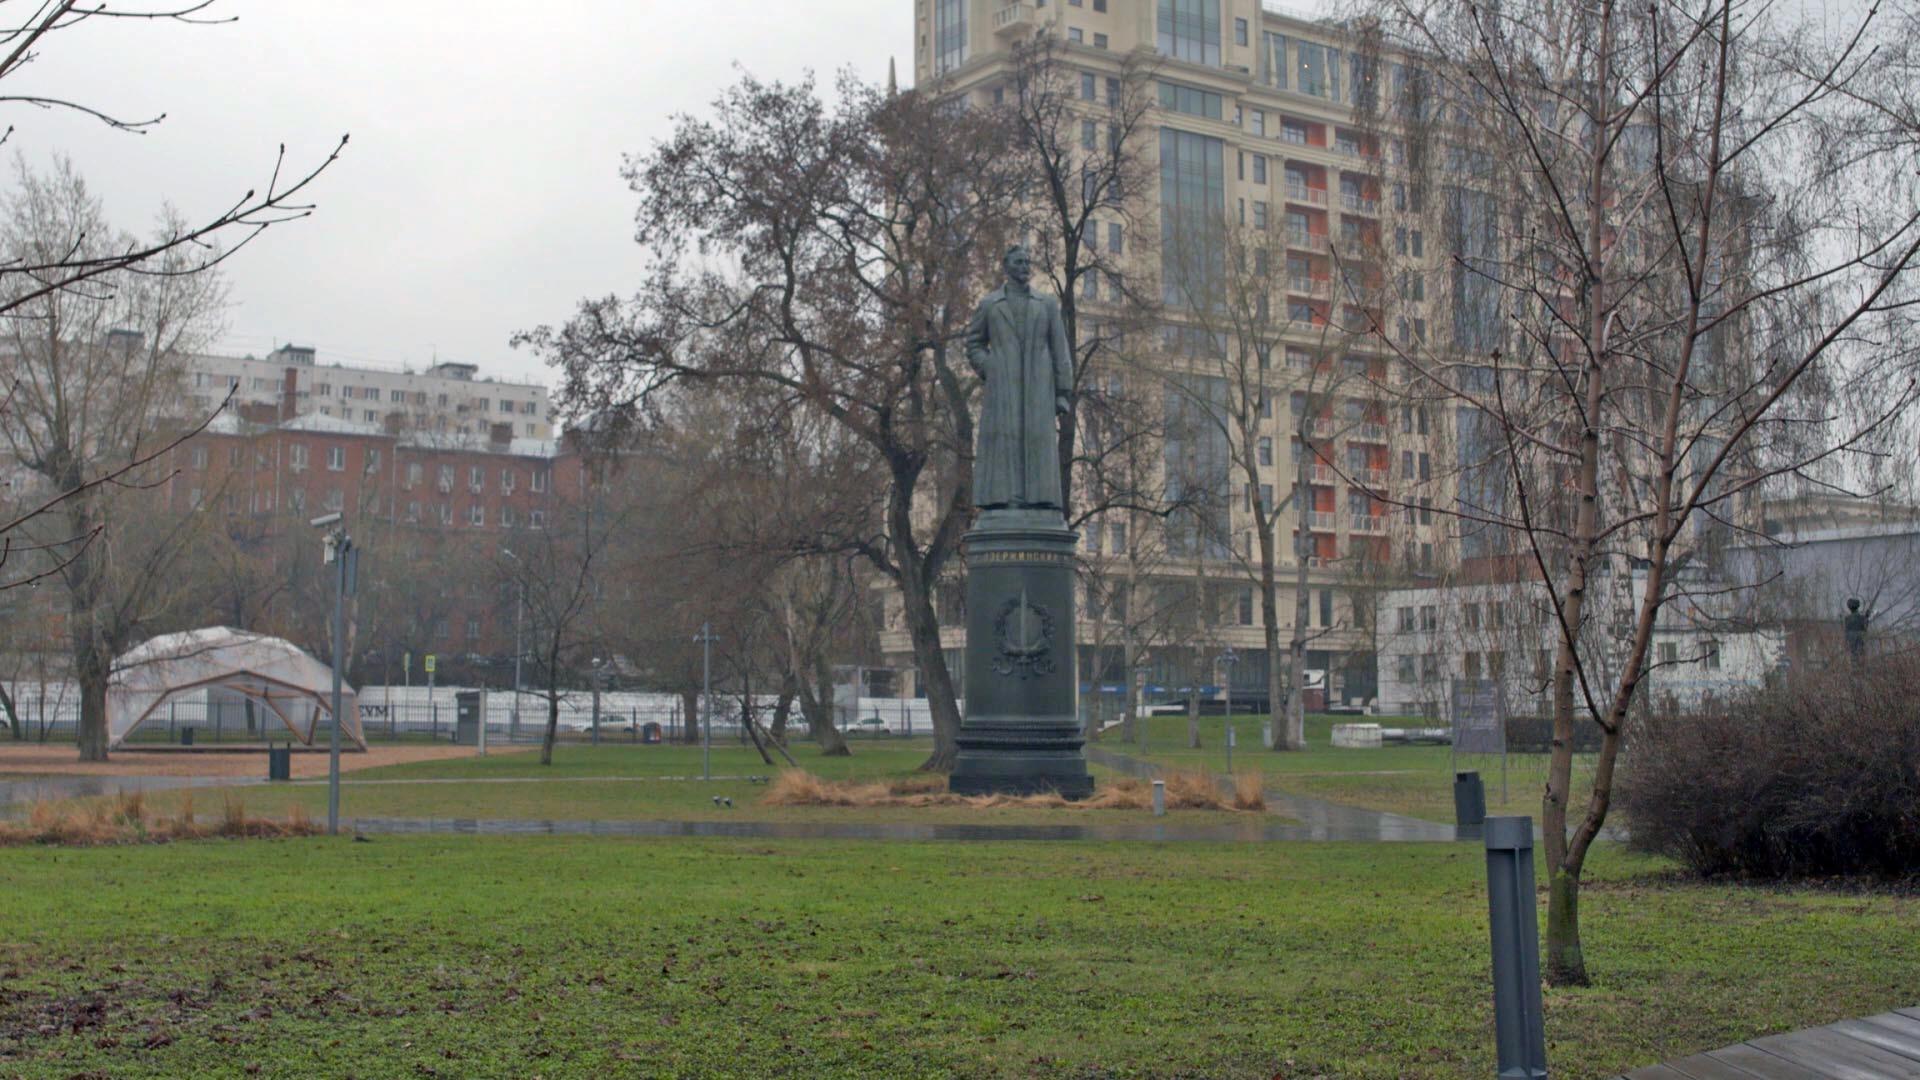 The “Iron Felix” Dzerzhinsky statue now stands in the Russian Park Muzeon, a stretch of grassy land nestled in Moscow.